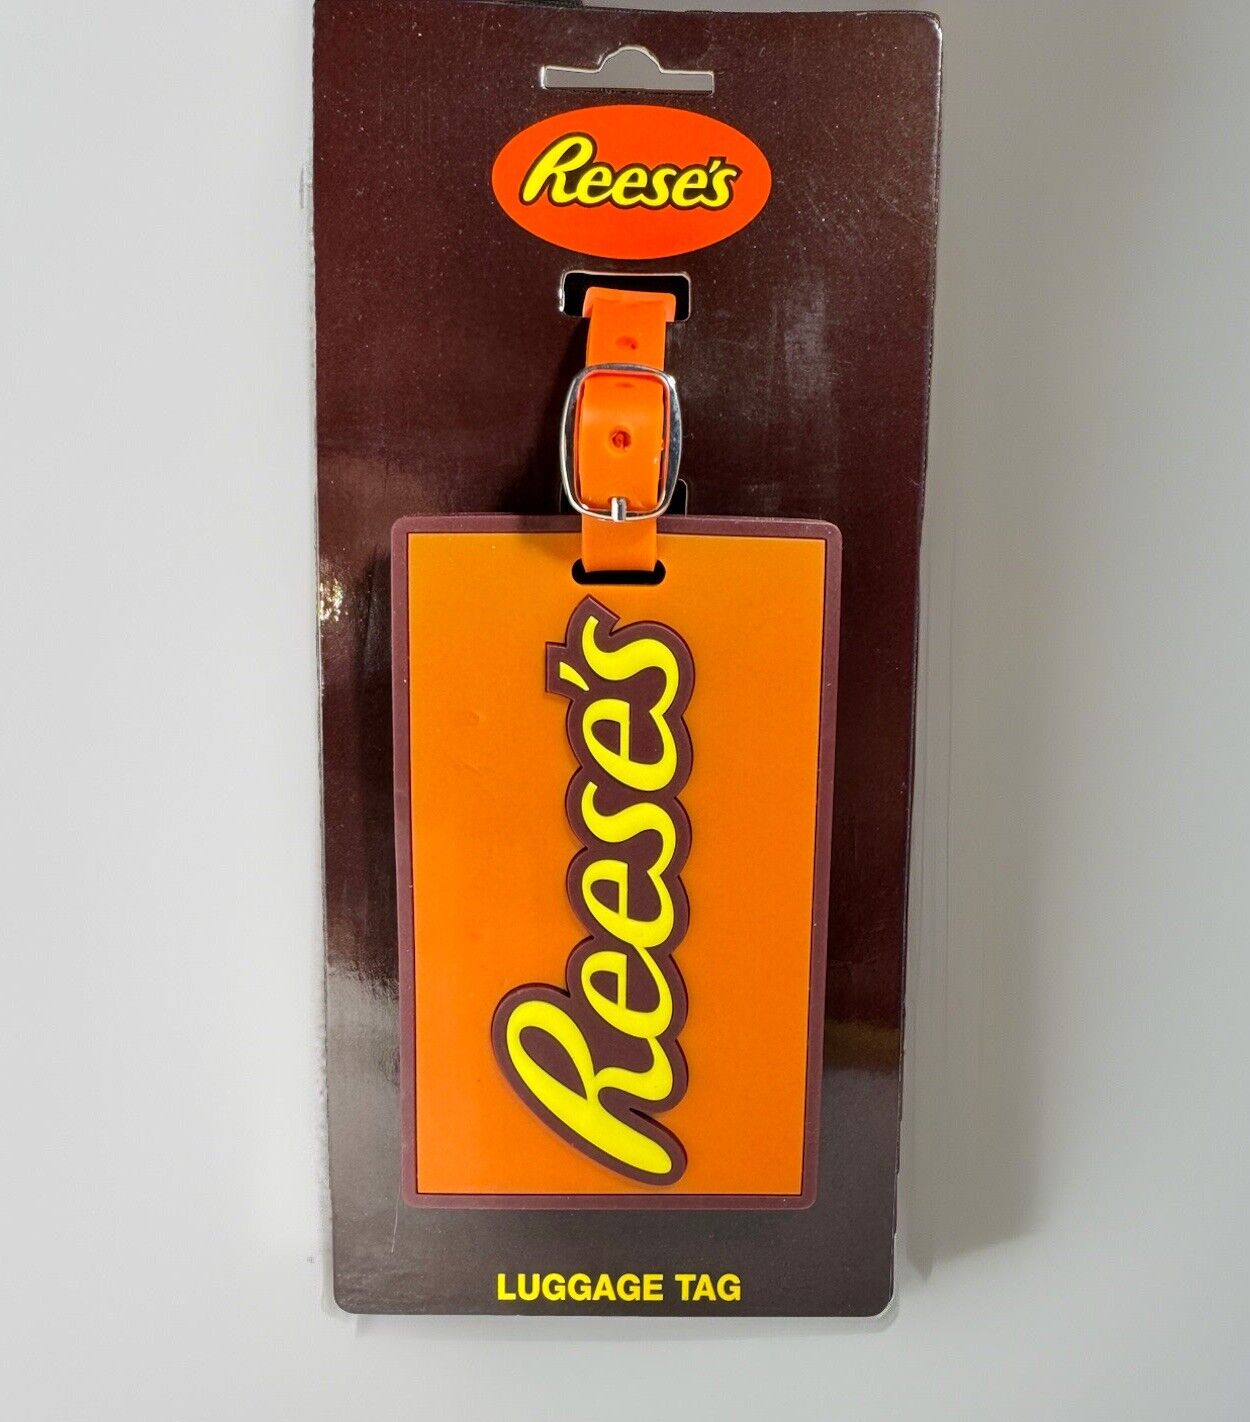 Hershey's Chocolate World Reese’s Luggage Tag Brand New With Tags NWT